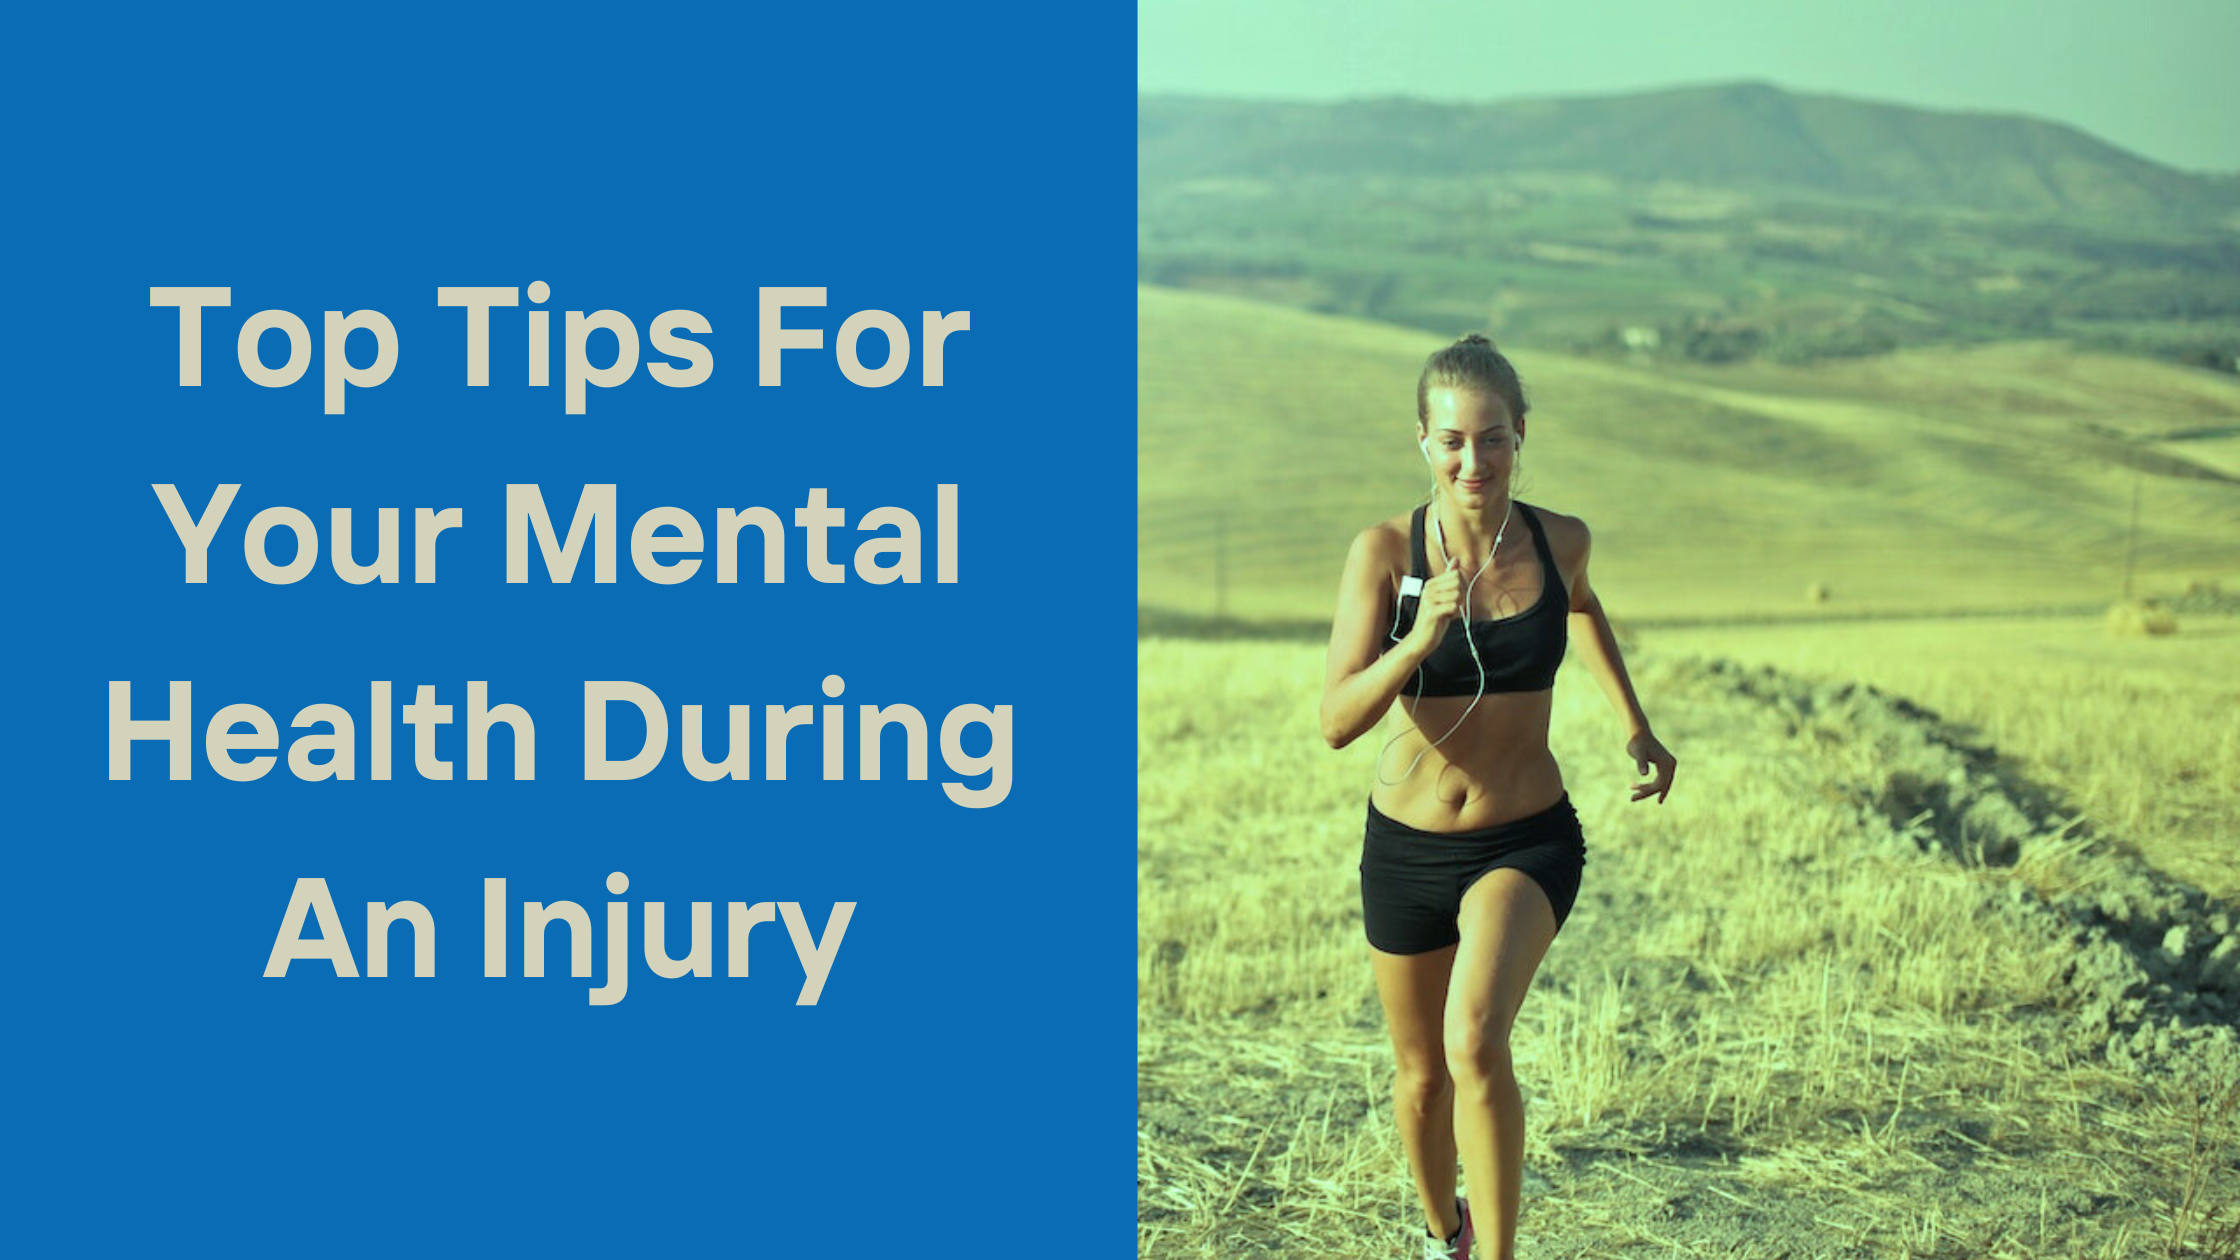 Top Tips For Your Mental Health During An Injury